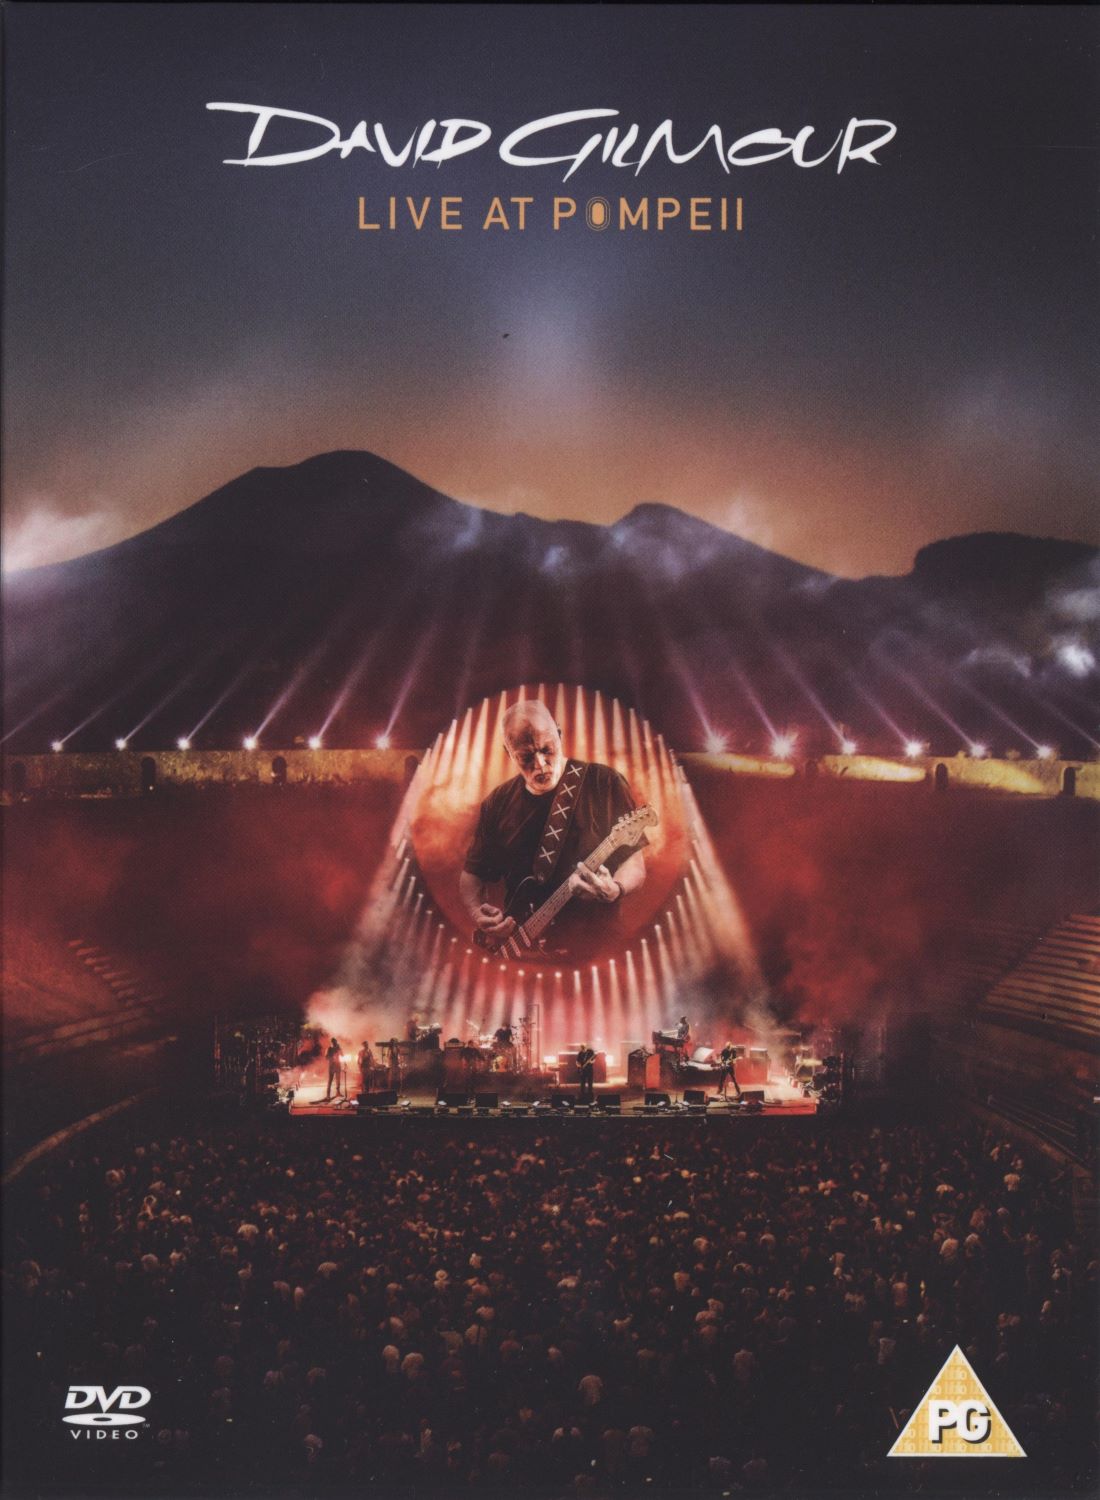 REPOST -- David Gilmour - Live At Pompeii [2017, Psychedelic Rock, 2xDVD9]